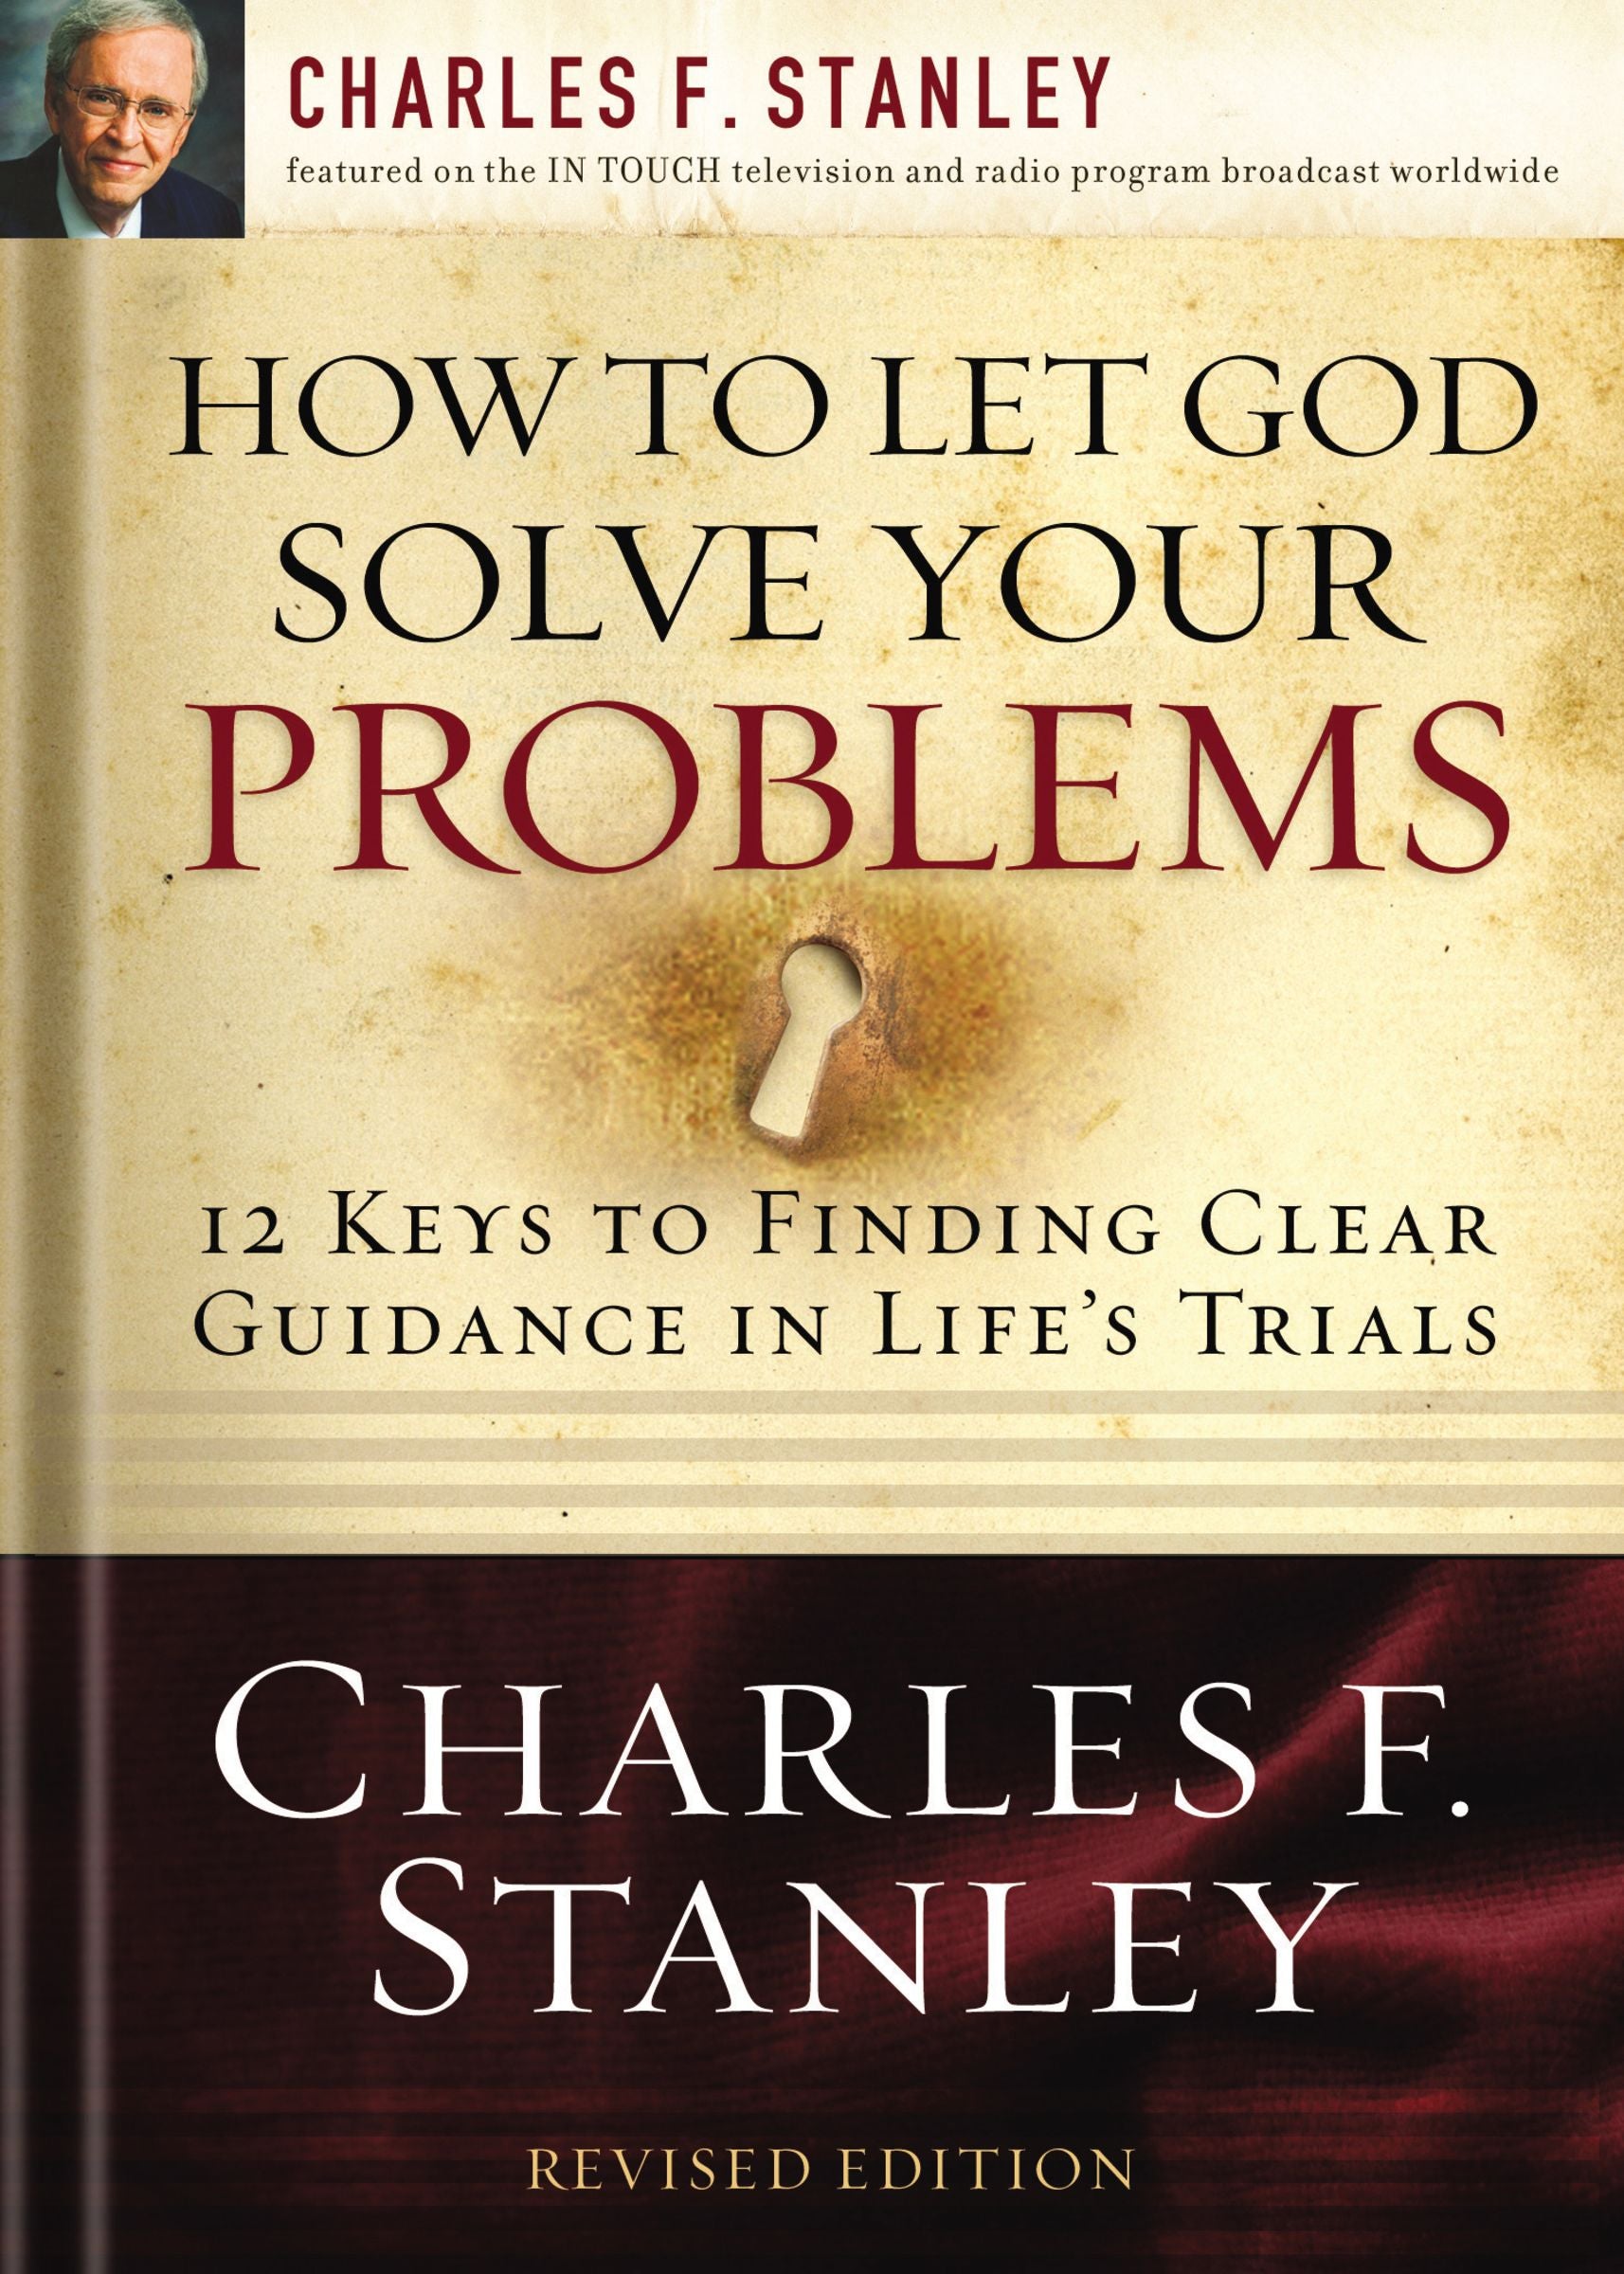 Image of How To Let God Solve Your Problems other